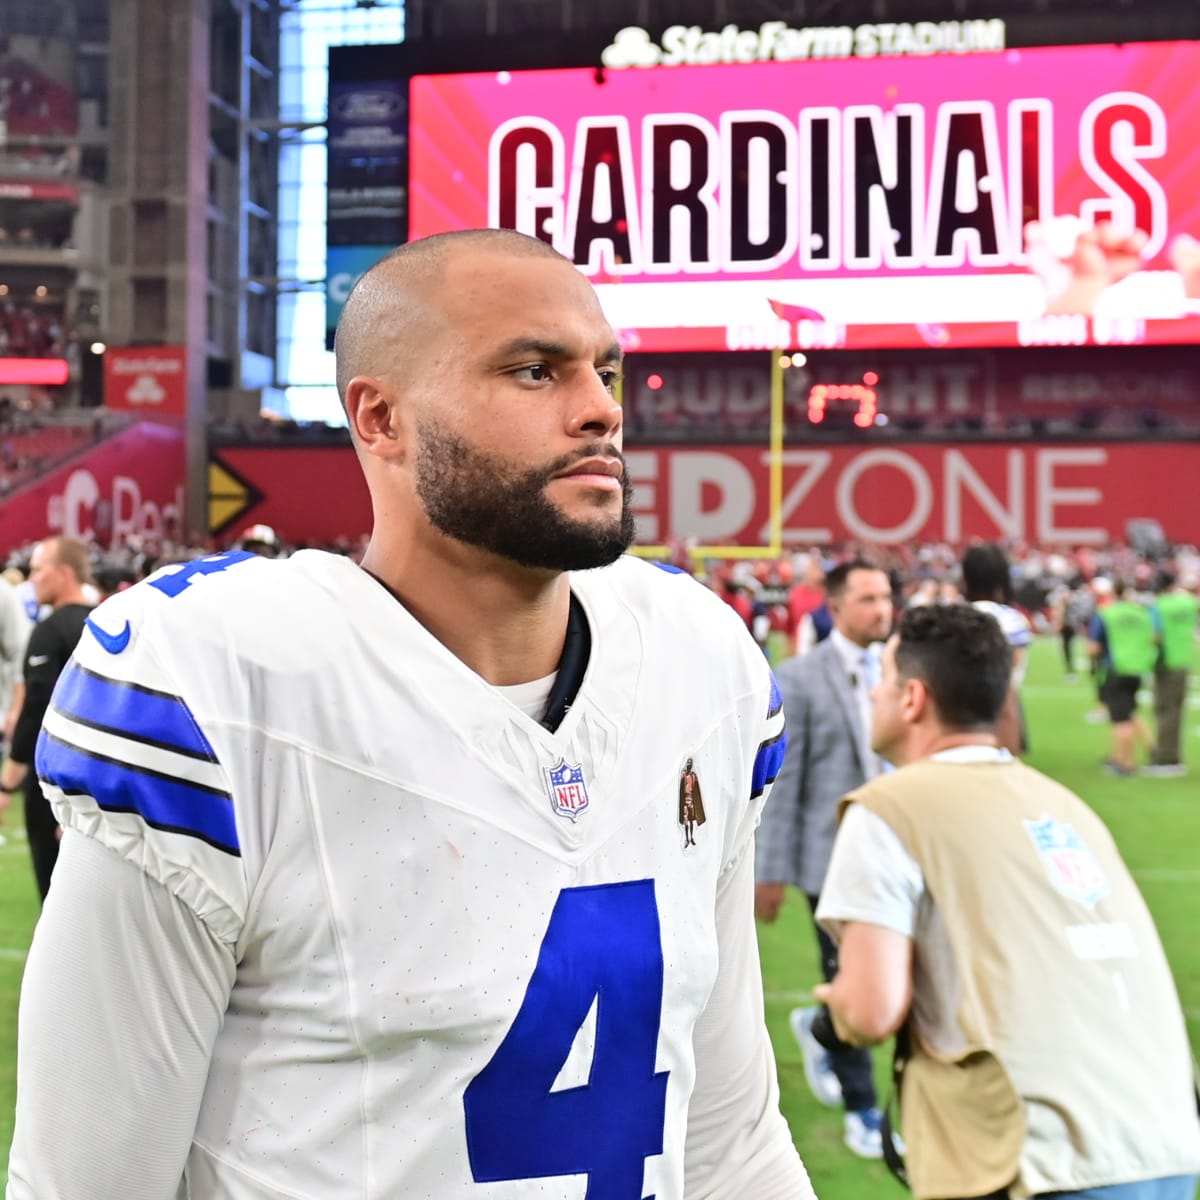 Dak Prescott Red Zone The Story of This Game - Period! Dallas Cowboys Lose 28-16 at Cardinals - Live Game Log